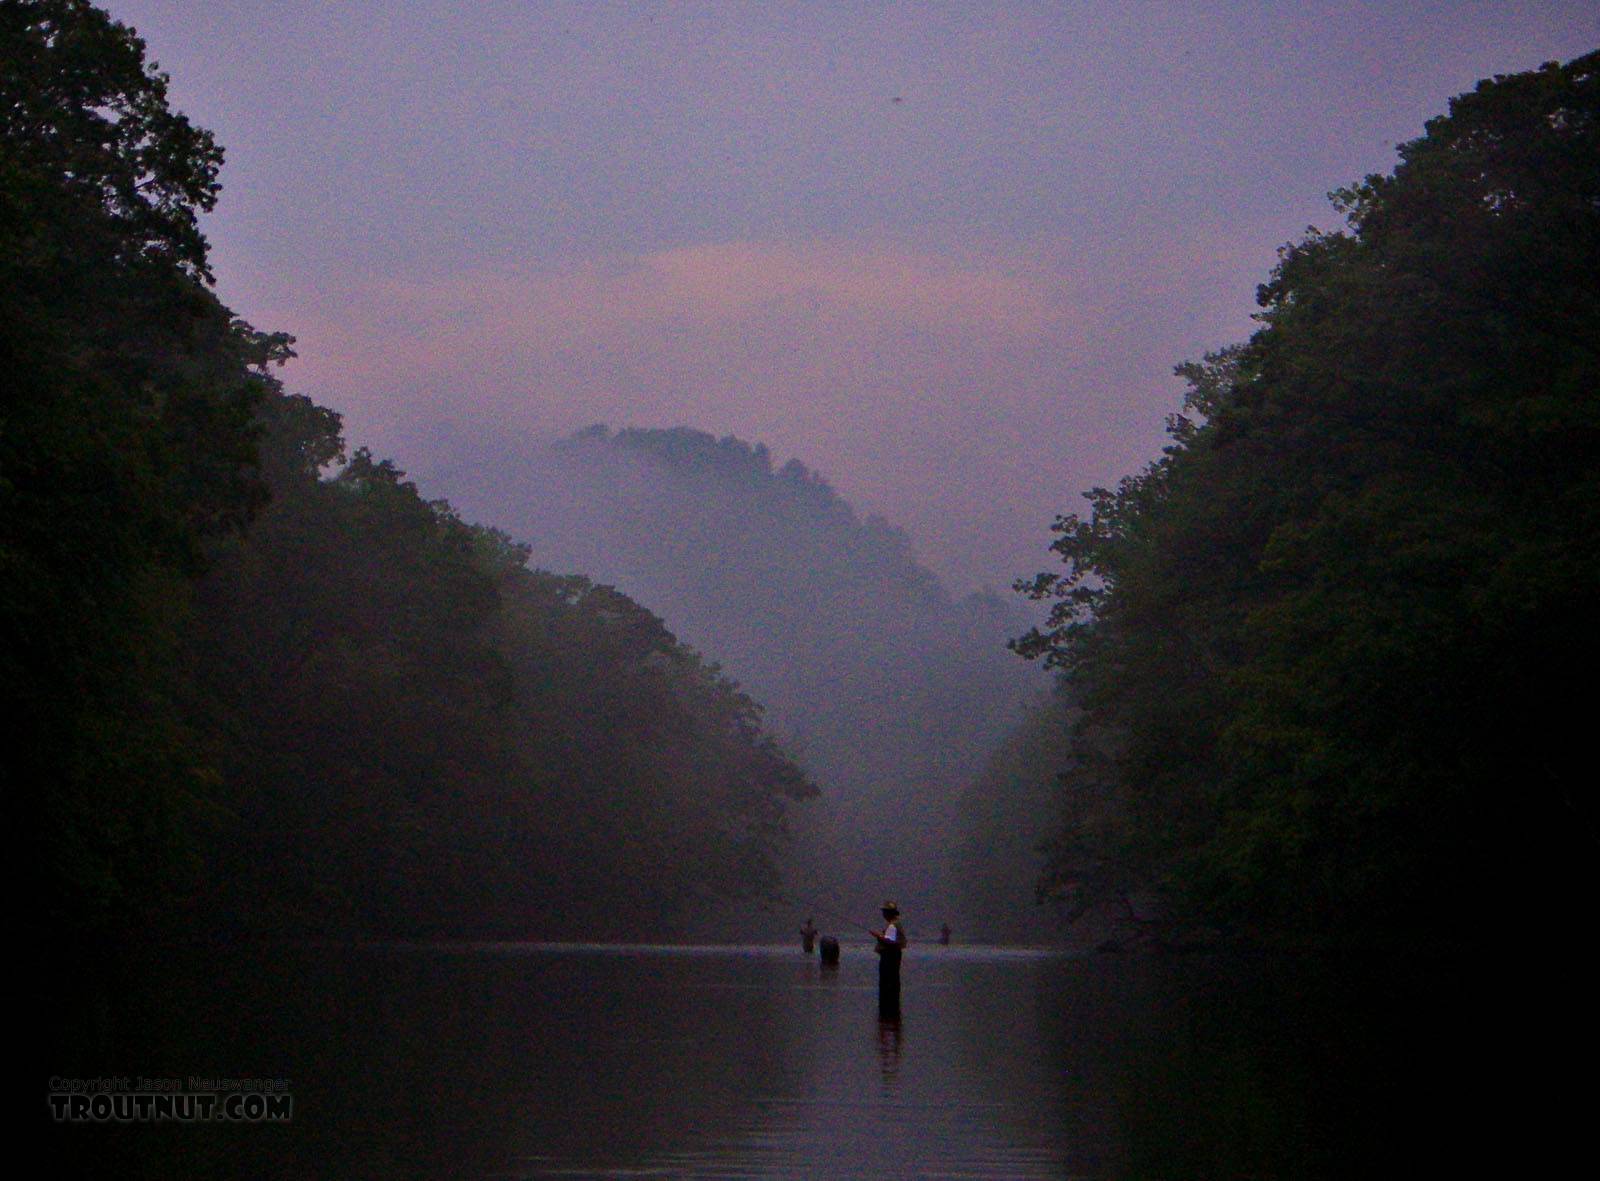 I was stuck sharing a long pool with several other fishermen on this popular spring creek, but I had the best fishing (the tail of the pool) all to myself, because it took the most walking to get there.  The dusk hatch was extremely intense, complex, and difficult. From Penn's Creek in Pennsylvania.